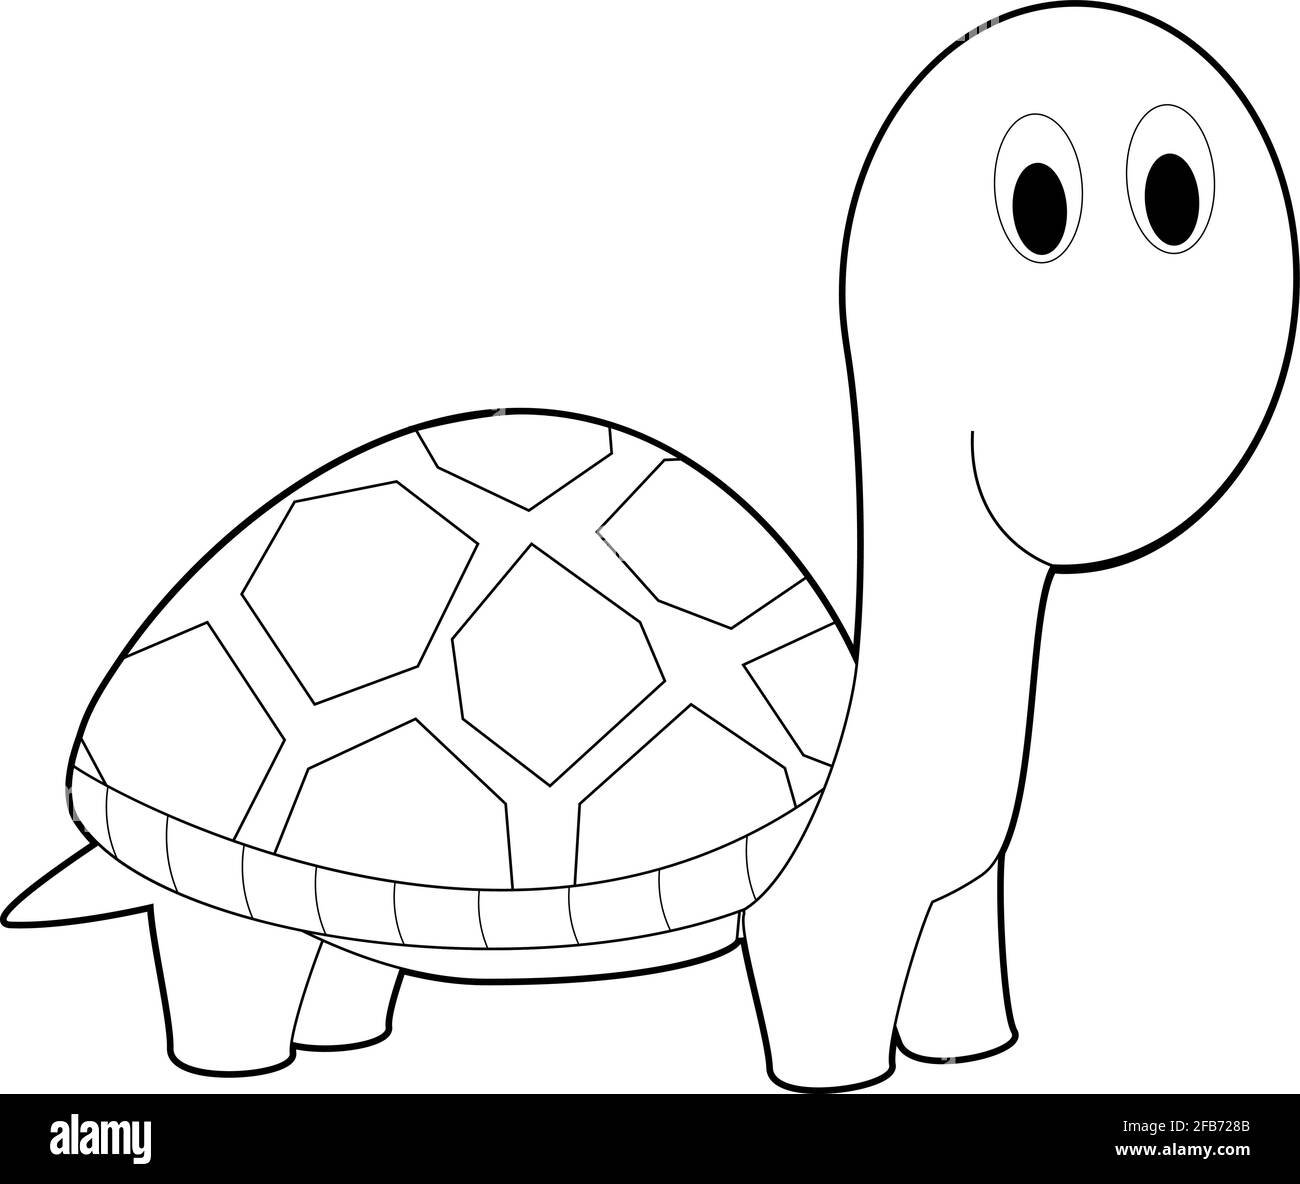 Easy Coloring drawings of animals for little kids: Turtle Stock Vector